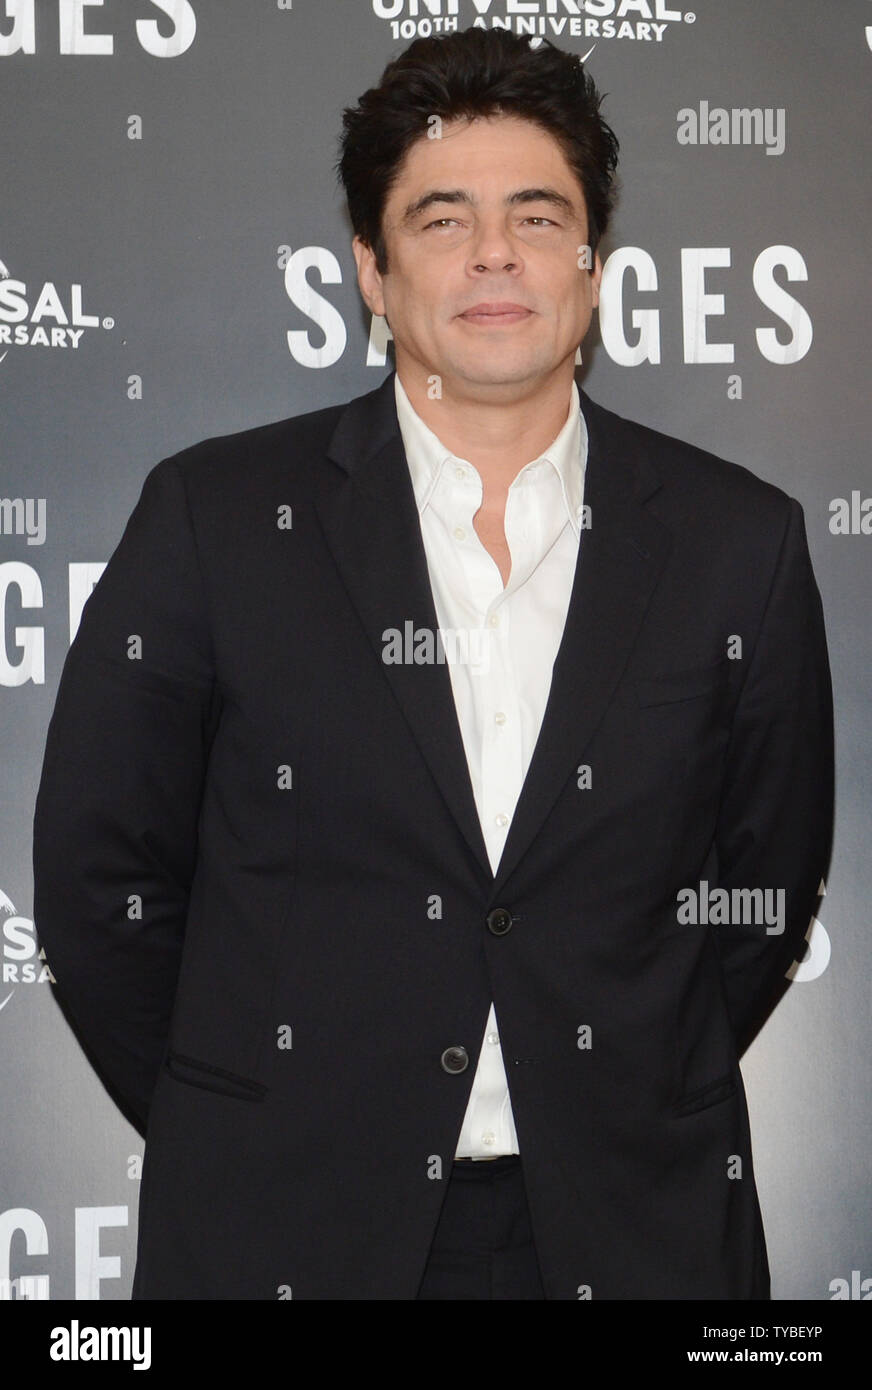 American actor Benicio Del Toro attends a photo call for 'Savages' at Mandarin Oriental Hotel in London on September 19, 2012.     UPI/Rune Hellestad Stock Photo